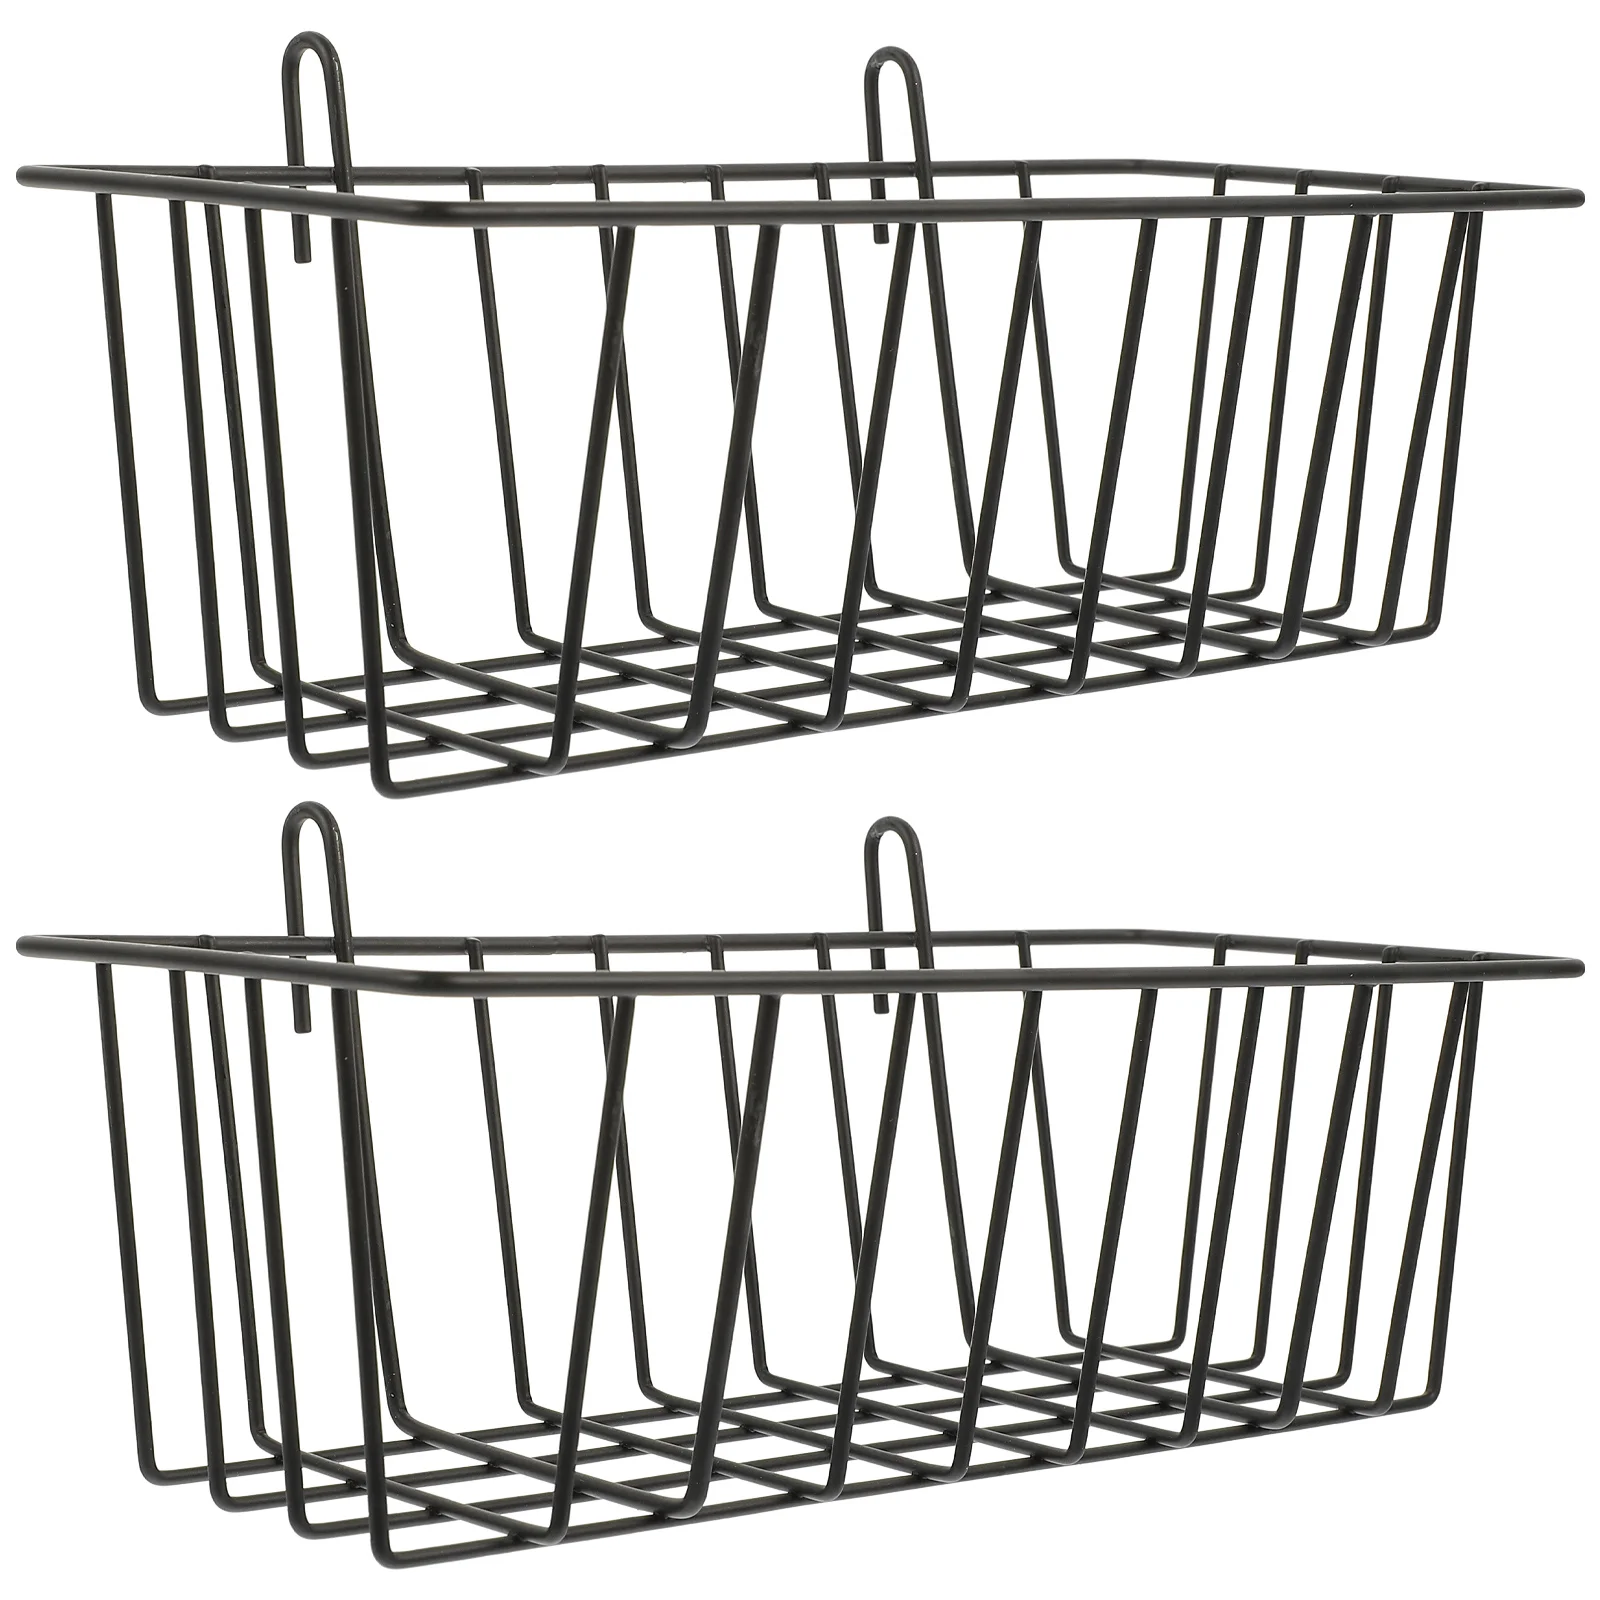 

2 Pcs Rabbit Hay Rack Hamster Feeder Food Containers Storage Racks Small Pet Cage Supplies Bite-resistant Wear-resistant